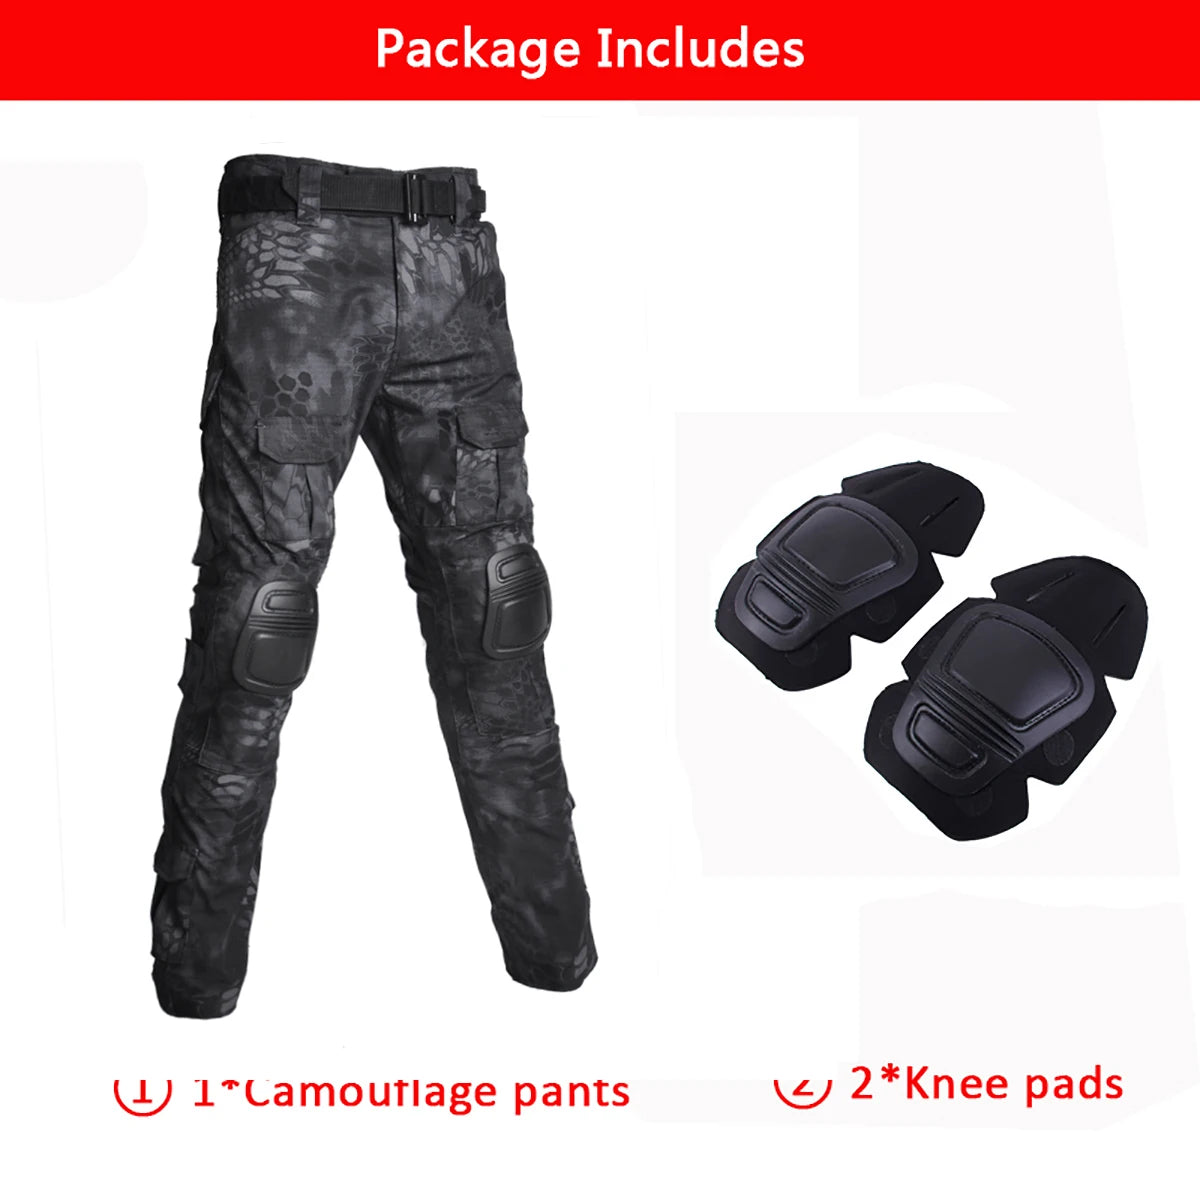 Multicam Camouflage Military Tactical Pants Army Wear-resistant Hiking Pant Paintball Combat Pant With Knee Pads Hunting Clothes black python pants